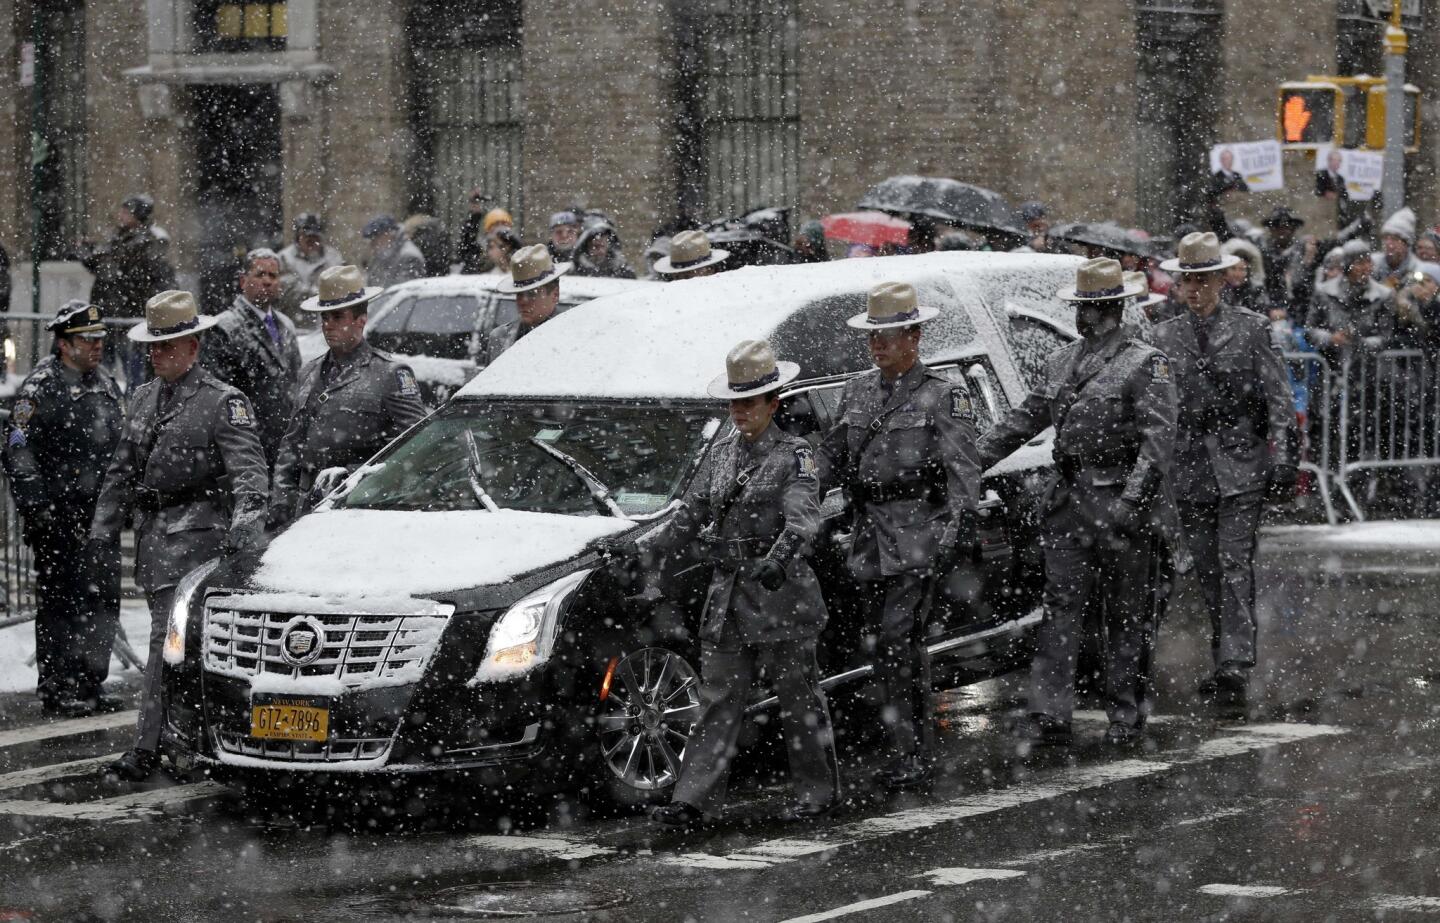 A hearse carrying the body of former New York Gov. Mario Cuomo is flanked by state troopers during his funeral at Church of St. Ignatius Loyola in New York. Cuomo, 82, died in his Manhattan home on Jan. 1, hours after his son Gov. Andrew Cuomo was inaugurated for a second term.